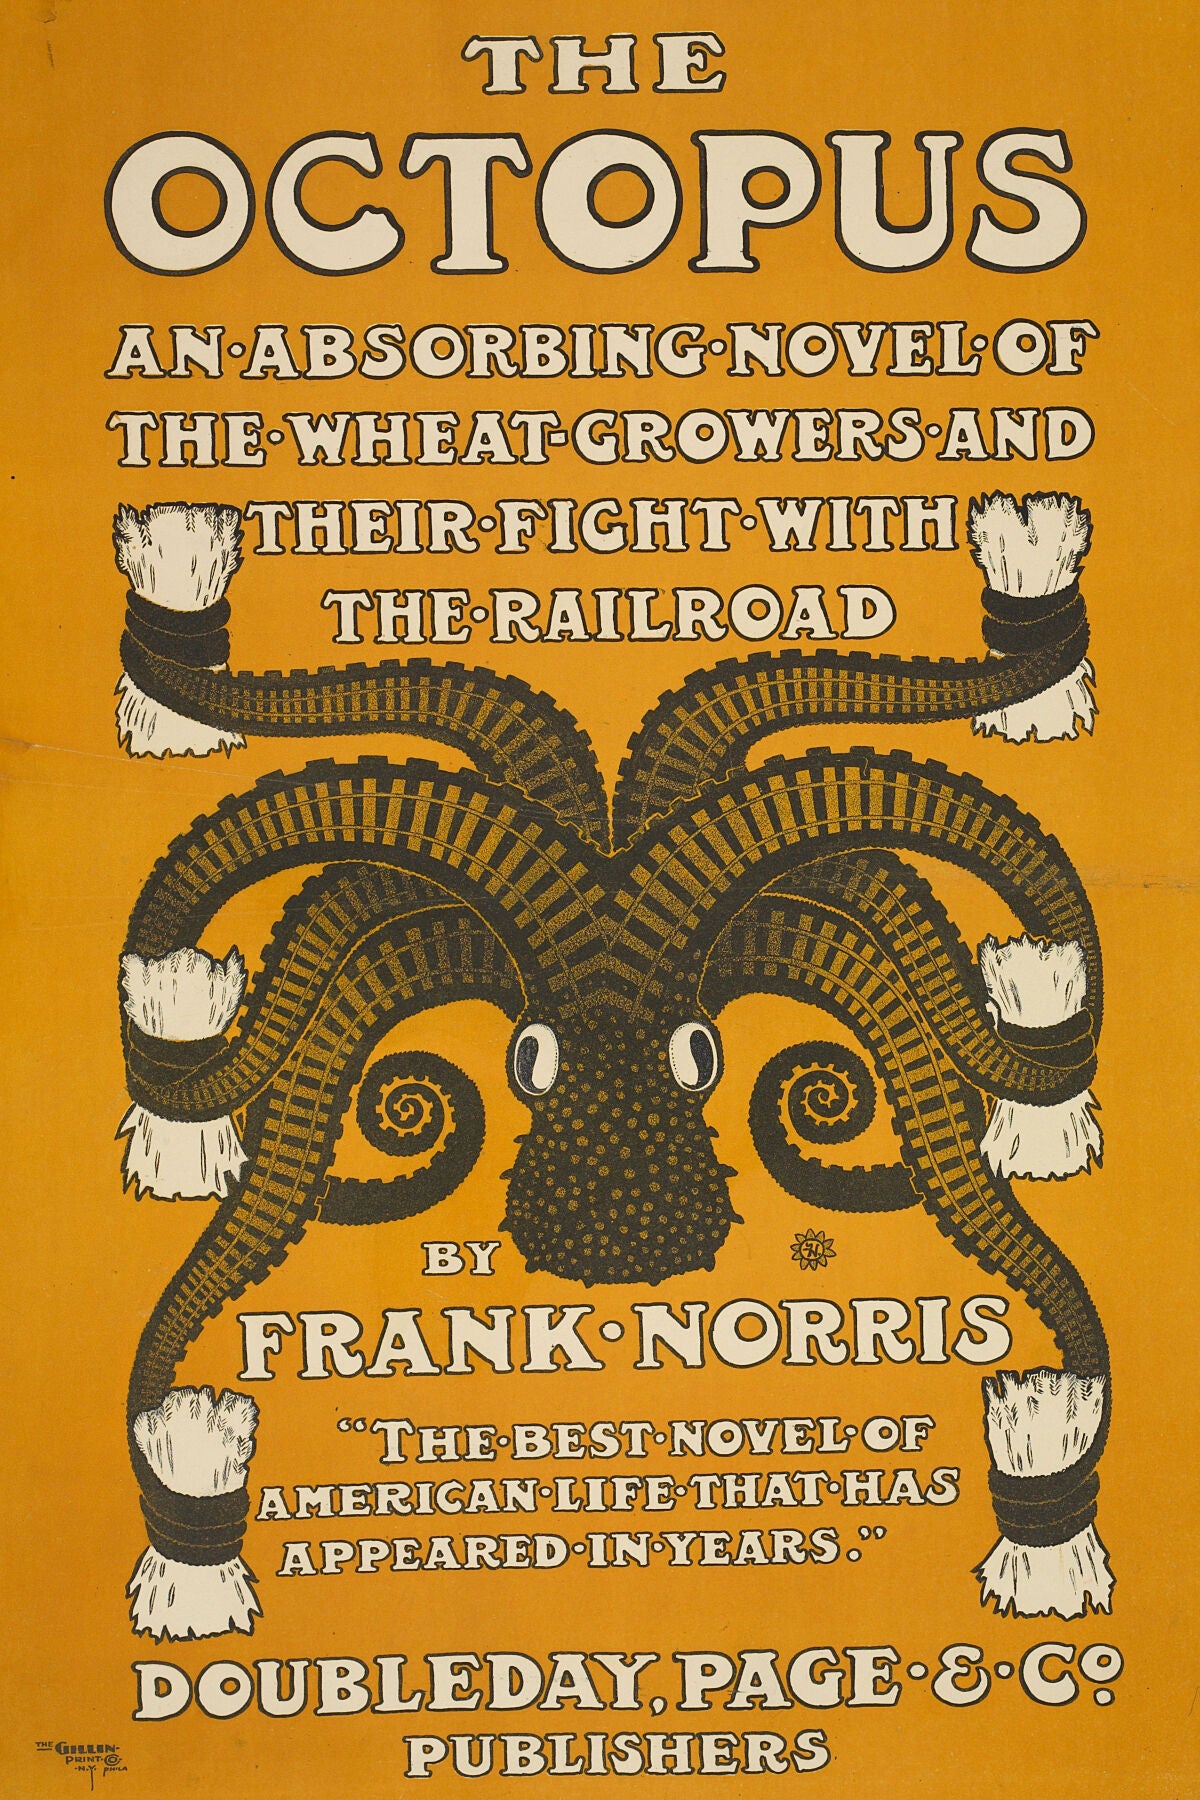 The Octopus by Frank Norris - 1901